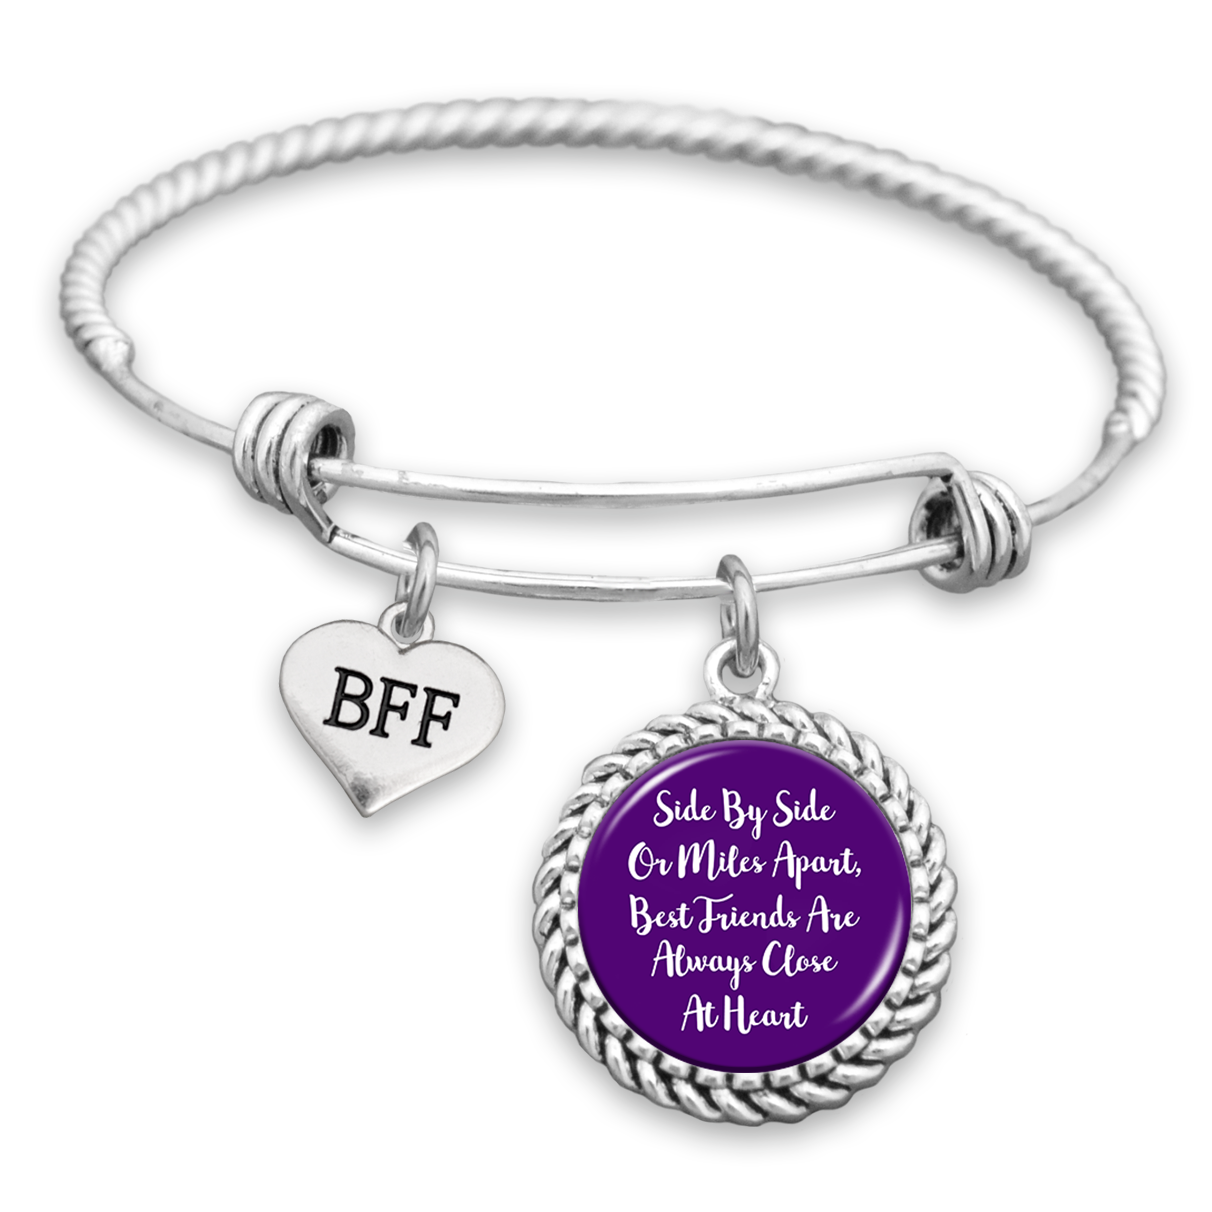 Side By Side Or Miles Apart, Best Friends Are Always Close At Heart Charm Bracelet